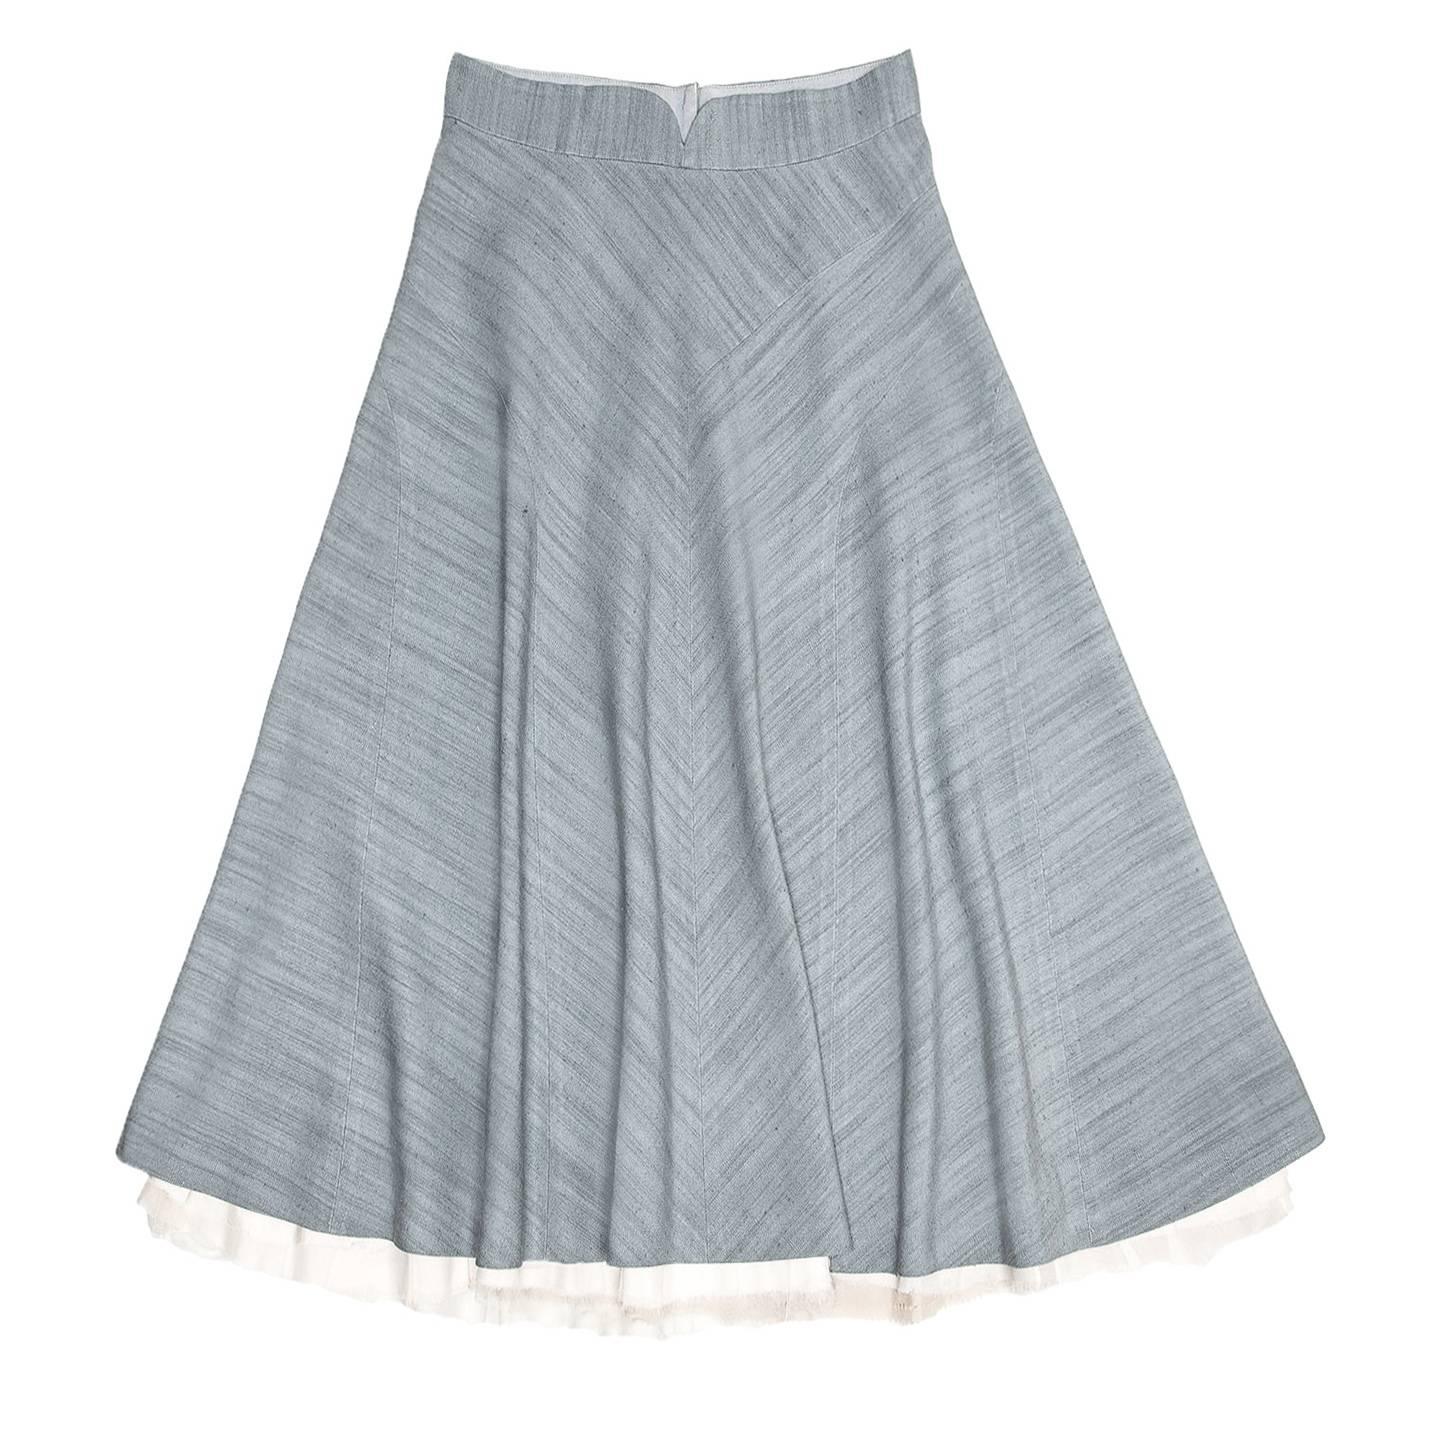 Silk and linen sky blue thick long skirt made of geometric panels and with a waist band beautifully shaped at front. The skirt is high waisted, ankle length with ivory raw inserts at hem and it has an a-line volume. Made in U.S.A.

Size  12 US